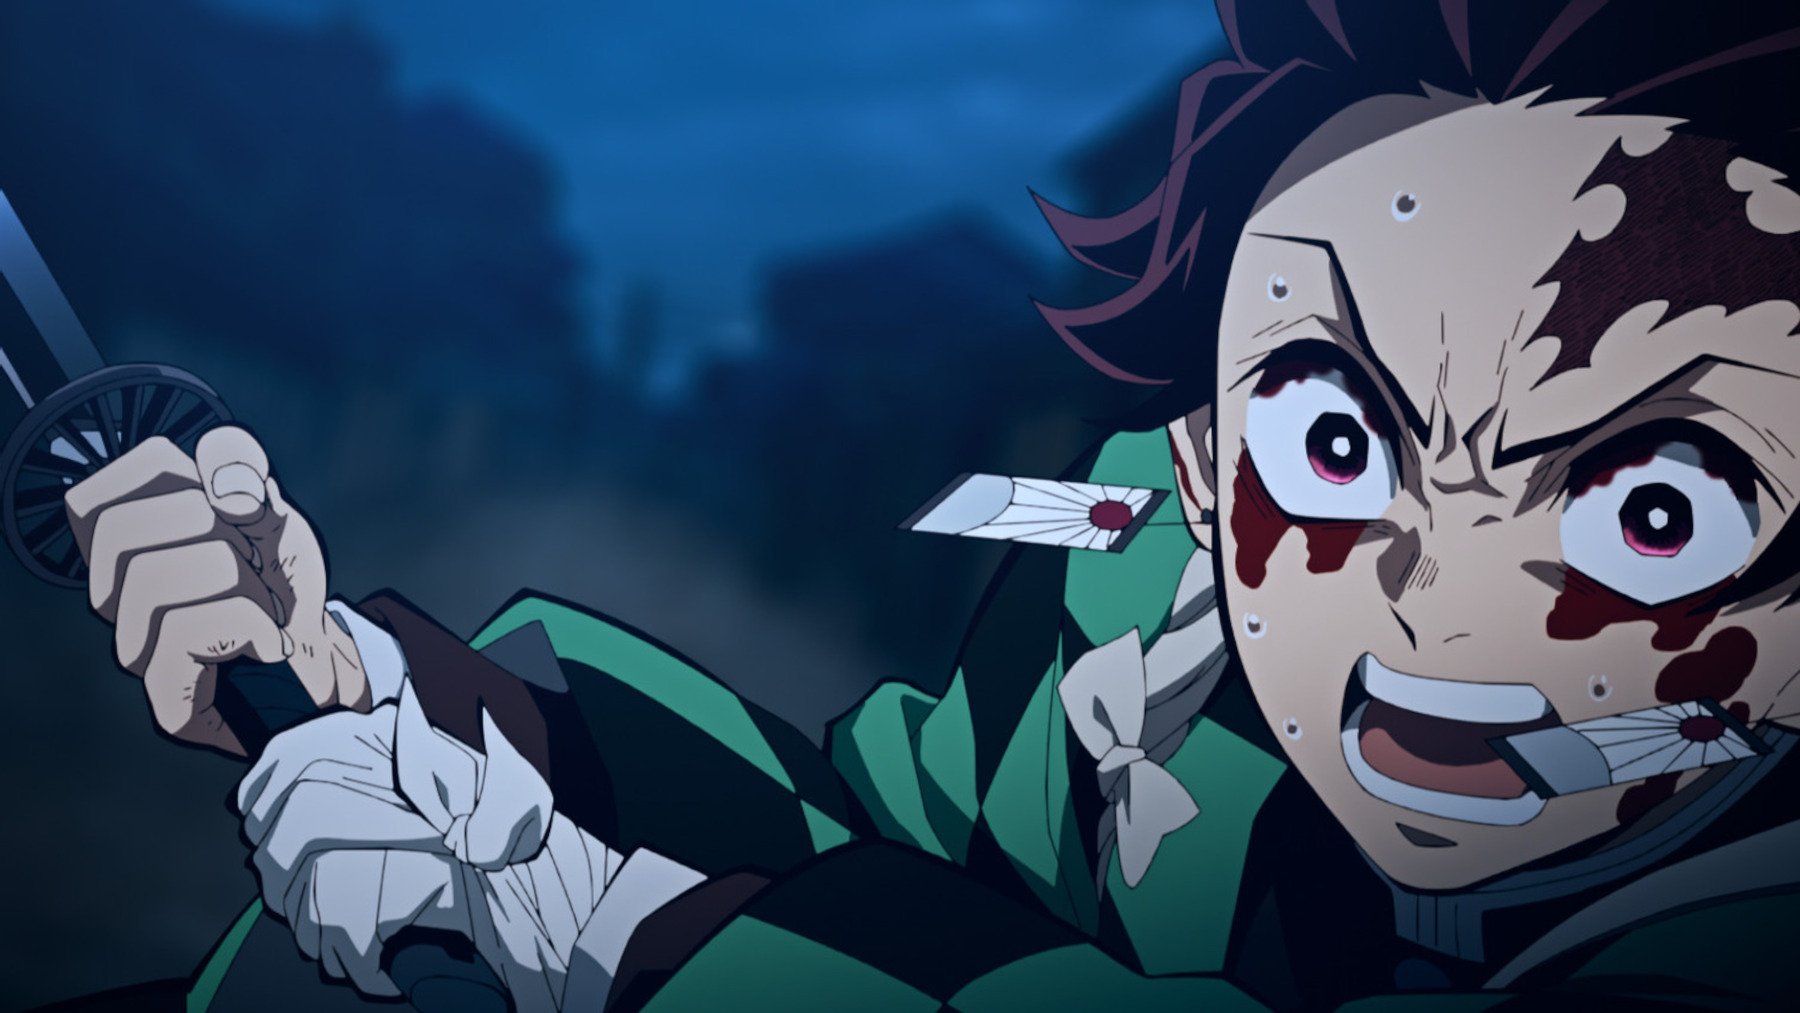 Rumour Suggests Demon Slayer Season 3 Finale Will Be Longer Than Usual